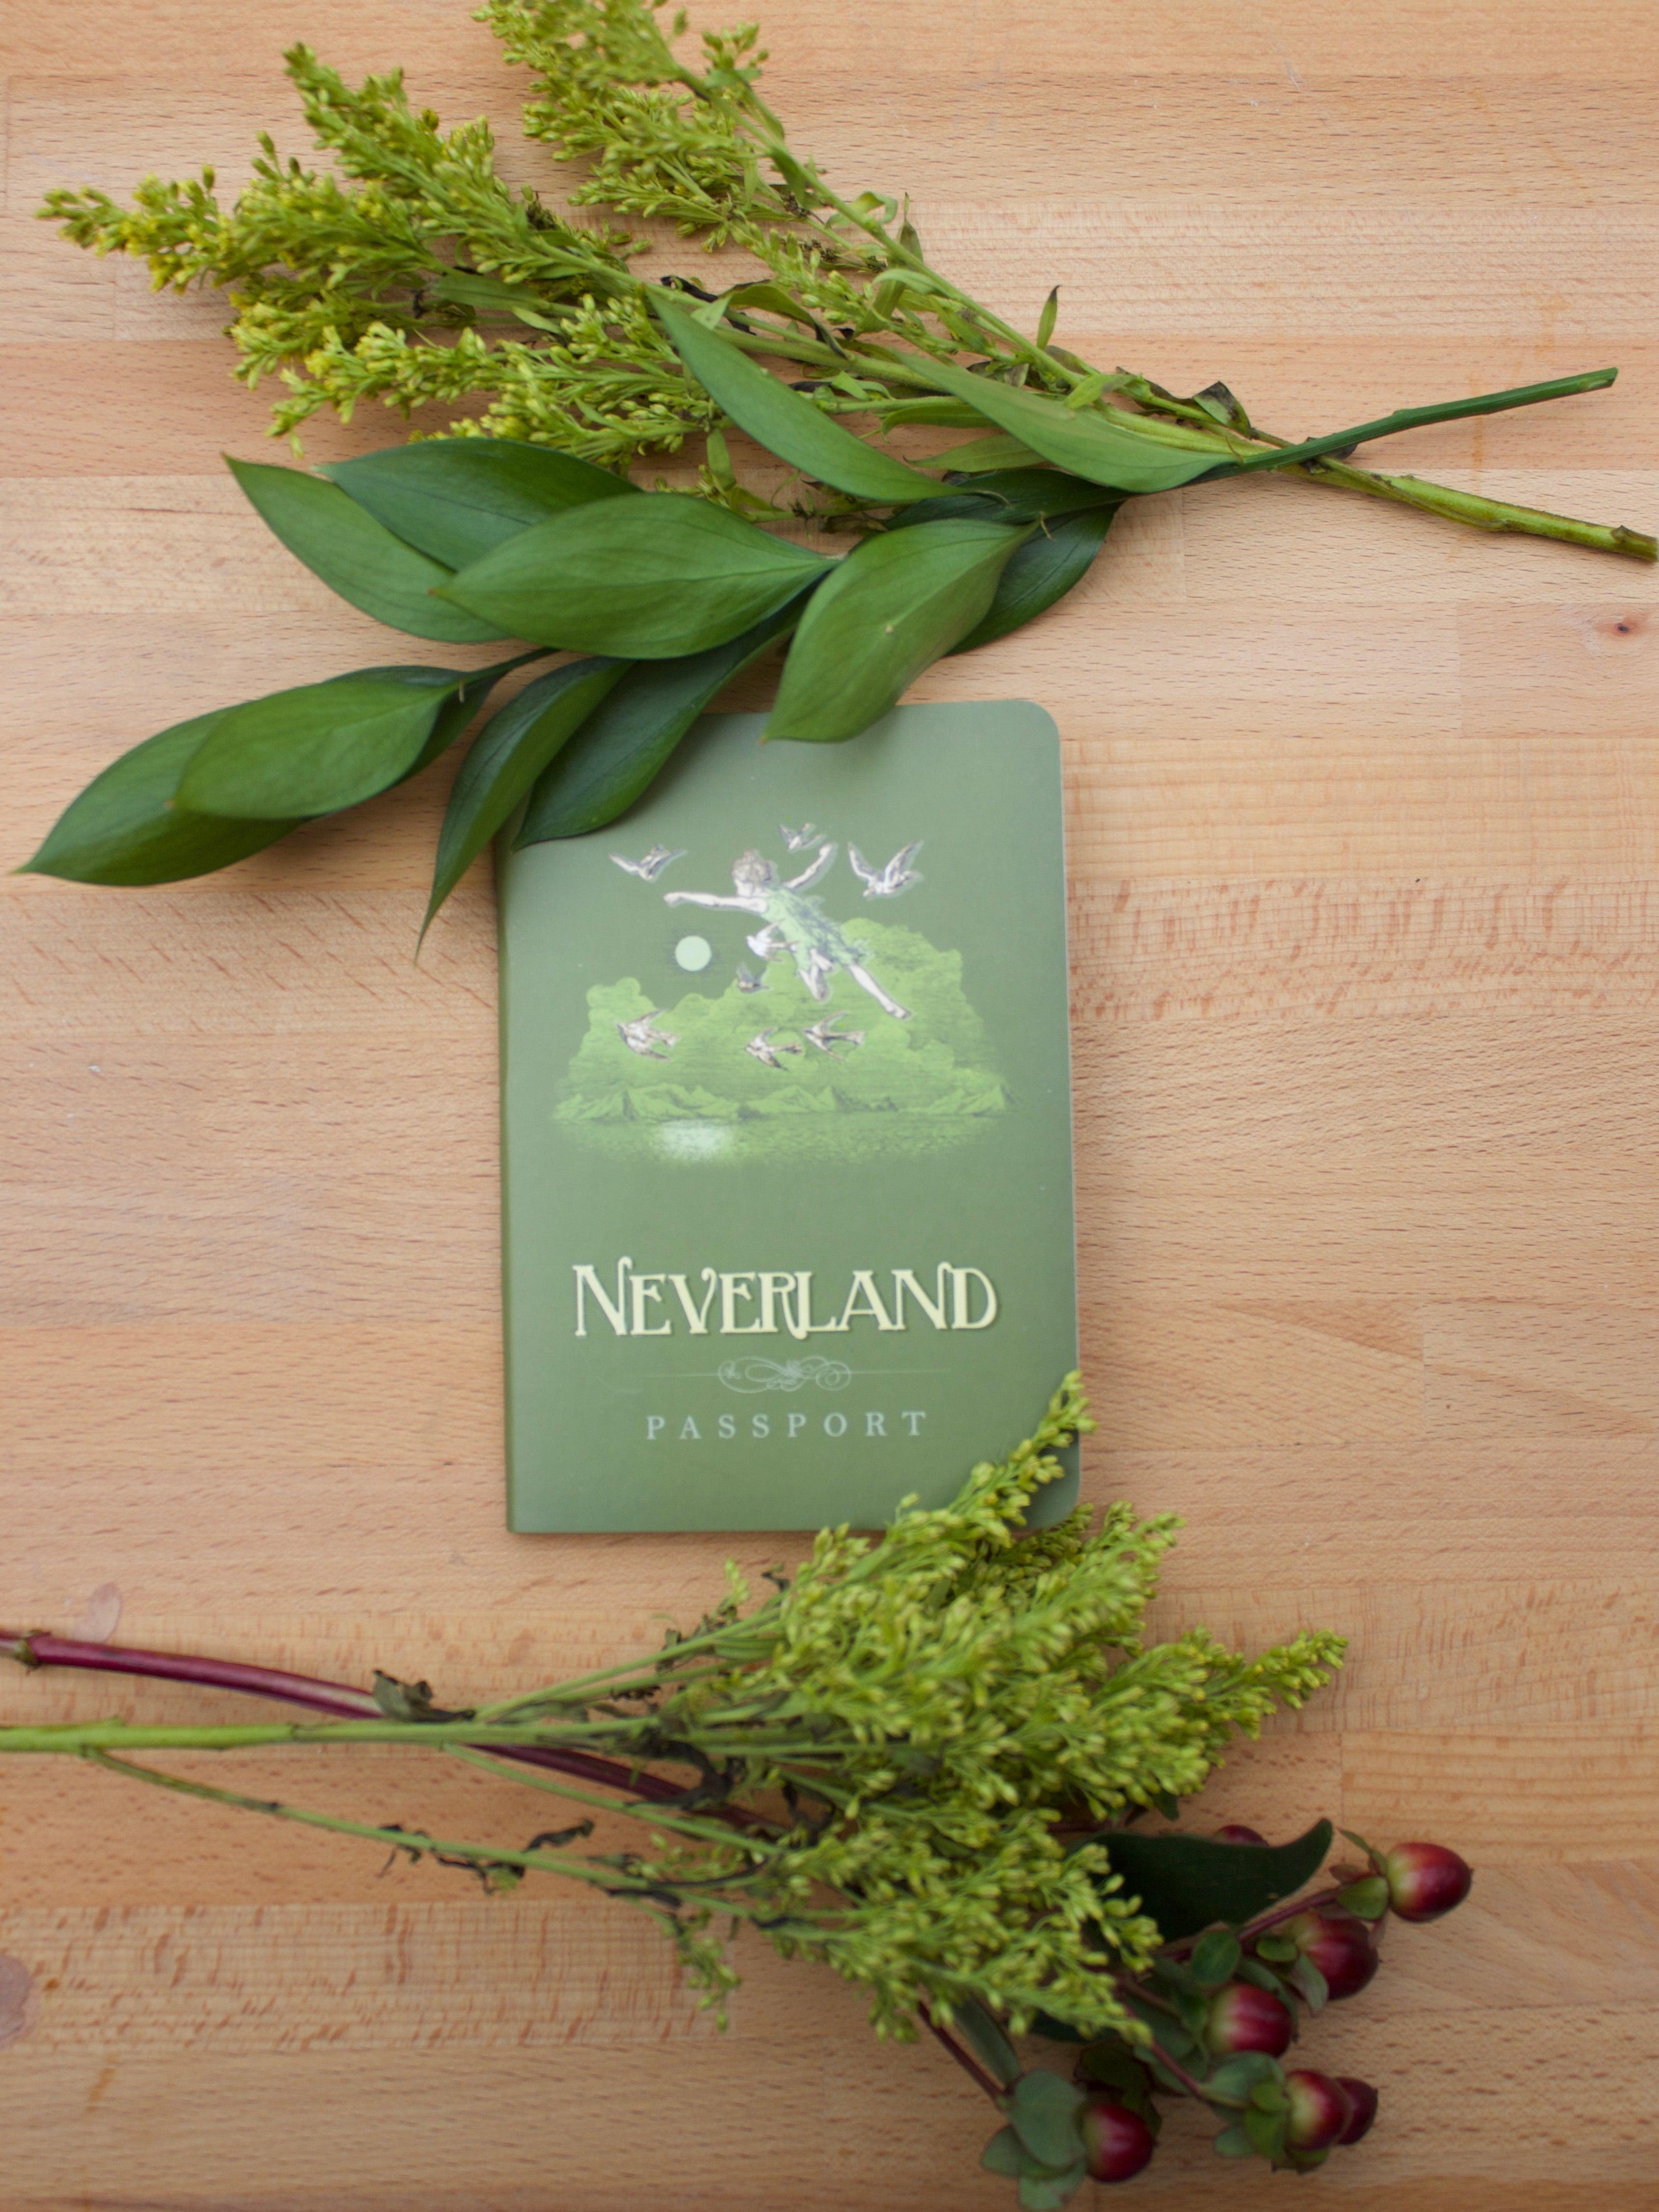 Product photo of Passport to Neverland Notebook, a novelty gift manufactured by The Unemployed Philosophers Guild.